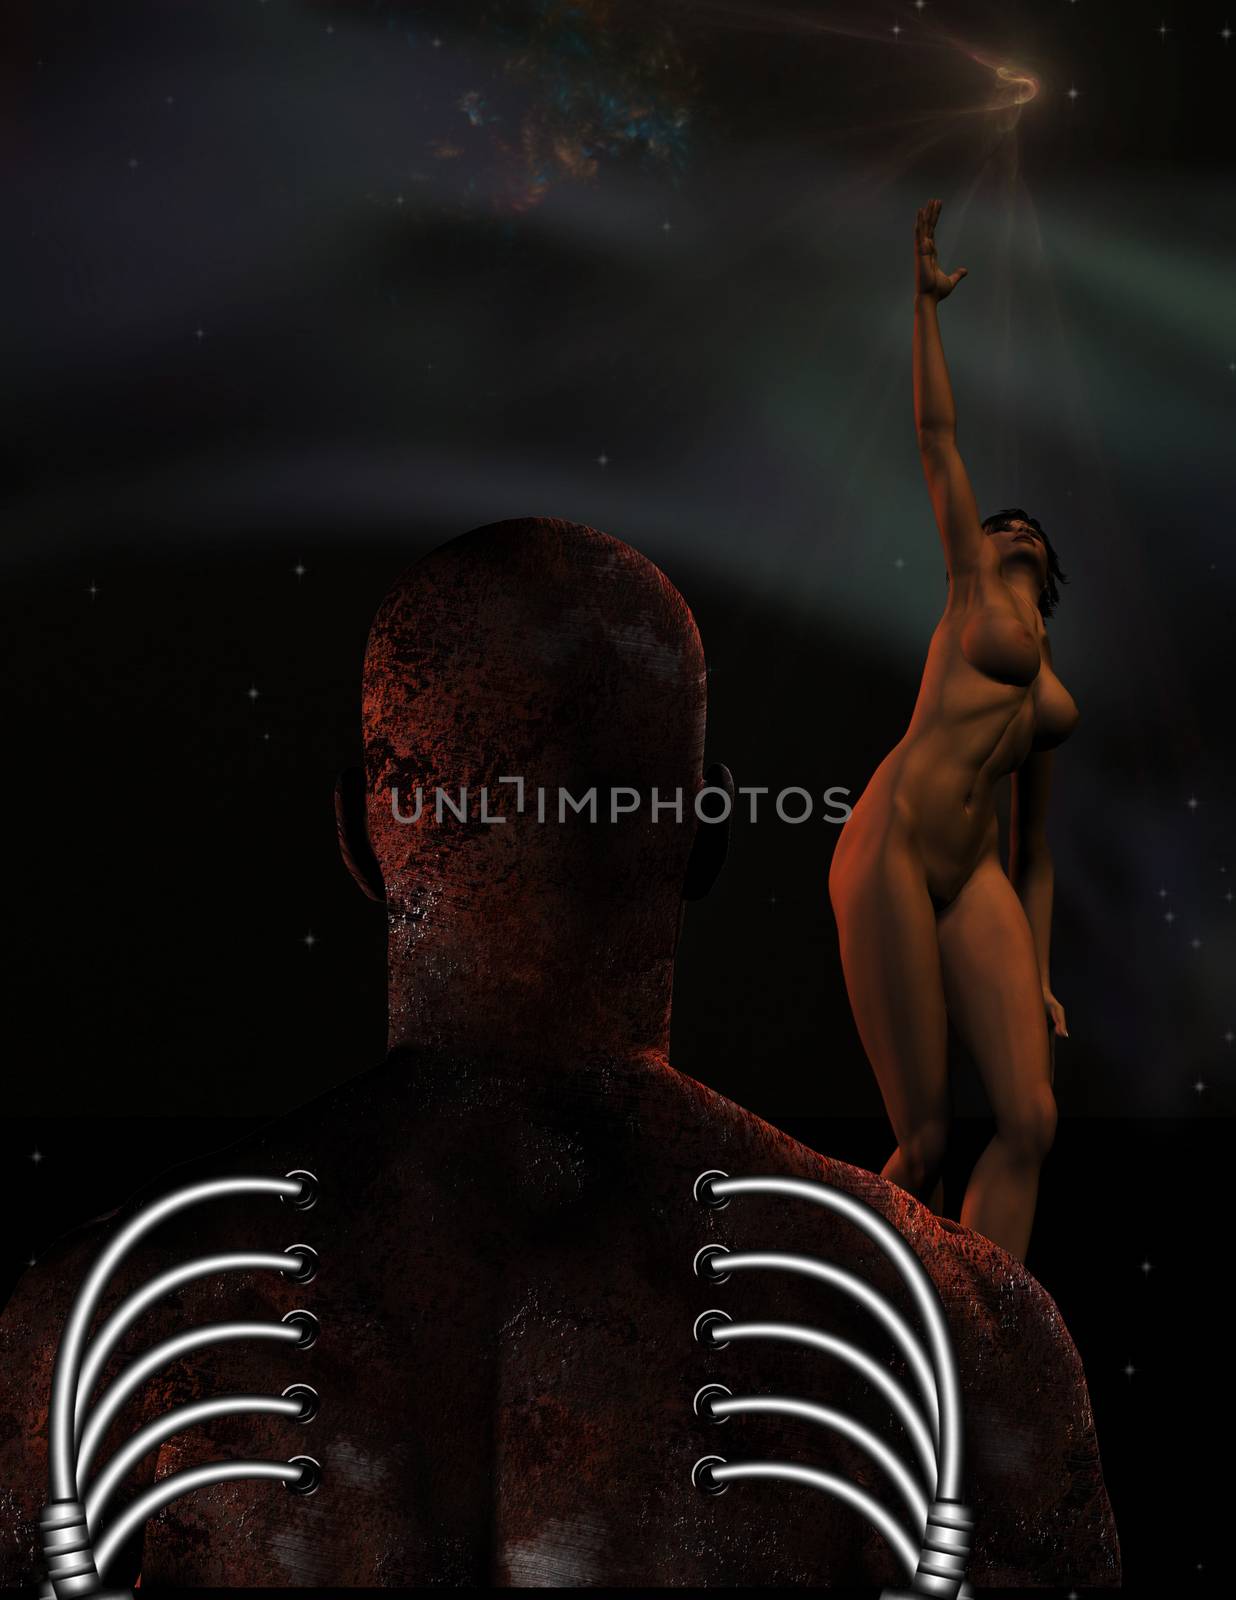 Future humanity - Rusted cyborg, woman ascends to the sky